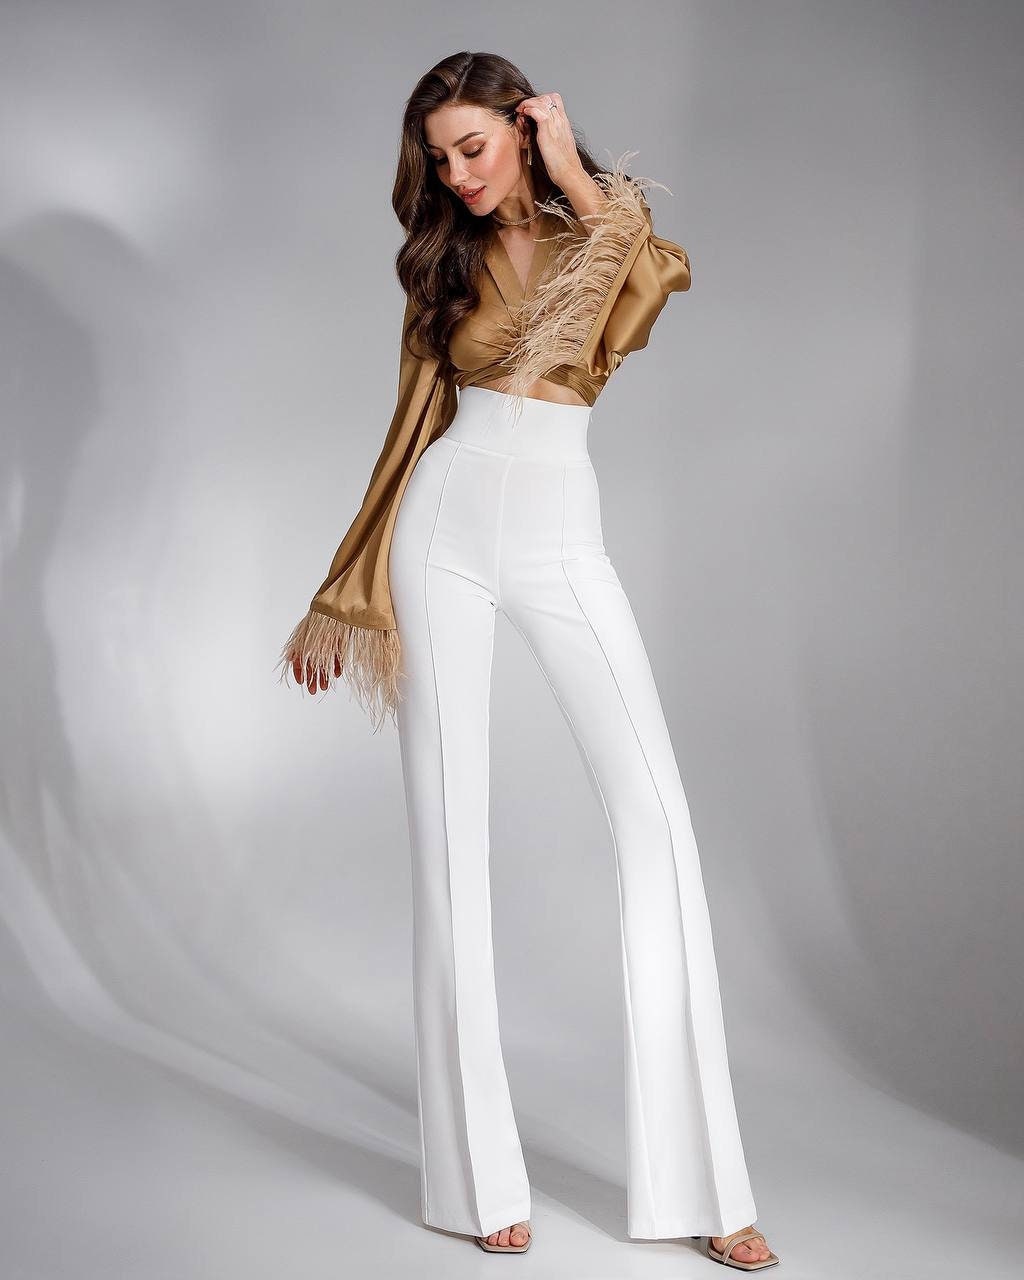 High Waist White Flare Pants, Pants for Women, Office Meeting Pants, White  Formal Pants, Trousers Women 